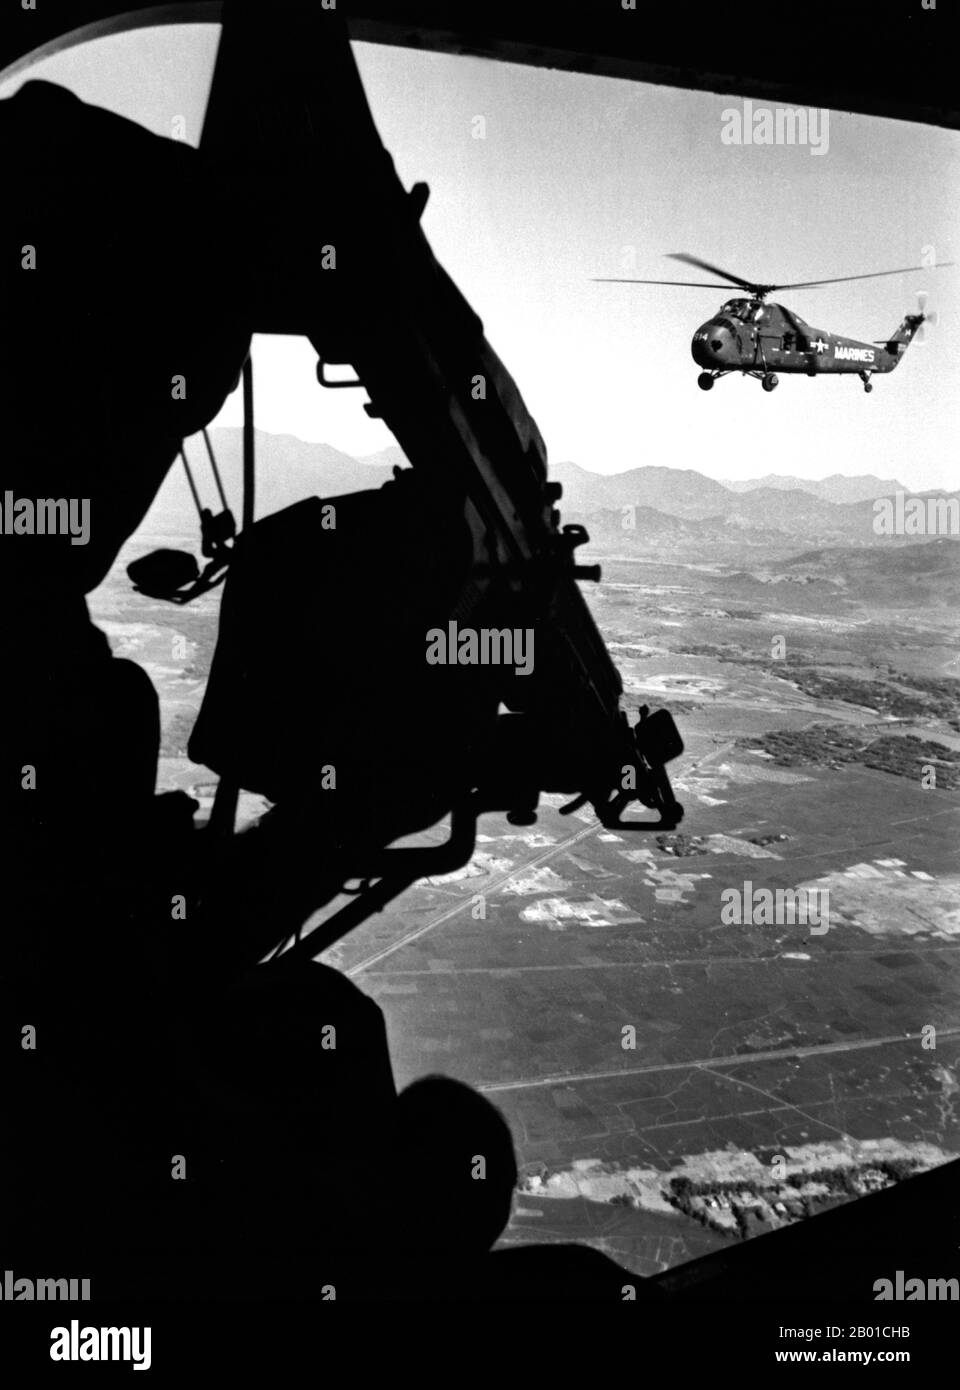 Vietnam: View from the door gunner's position from a U.S. Marine Corps Sikorsky UH-34D Seahorse helicopter over Vietnam; the gunner's M-60 machine gun is in the foreground, c. 1965.  The Second Indochina War, known in America as the Vietnam War, was a Cold War era military conflict that occurred in Vietnam, Laos, and Cambodia from 1 November 1955 to the fall of Saigon on 30 April 1975. This war followed the First Indochina War and was fought between North Vietnam, supported by its communist allies, and the government of South Vietnam, supported by the U.S. and other anti-communist nations. Stock Photo